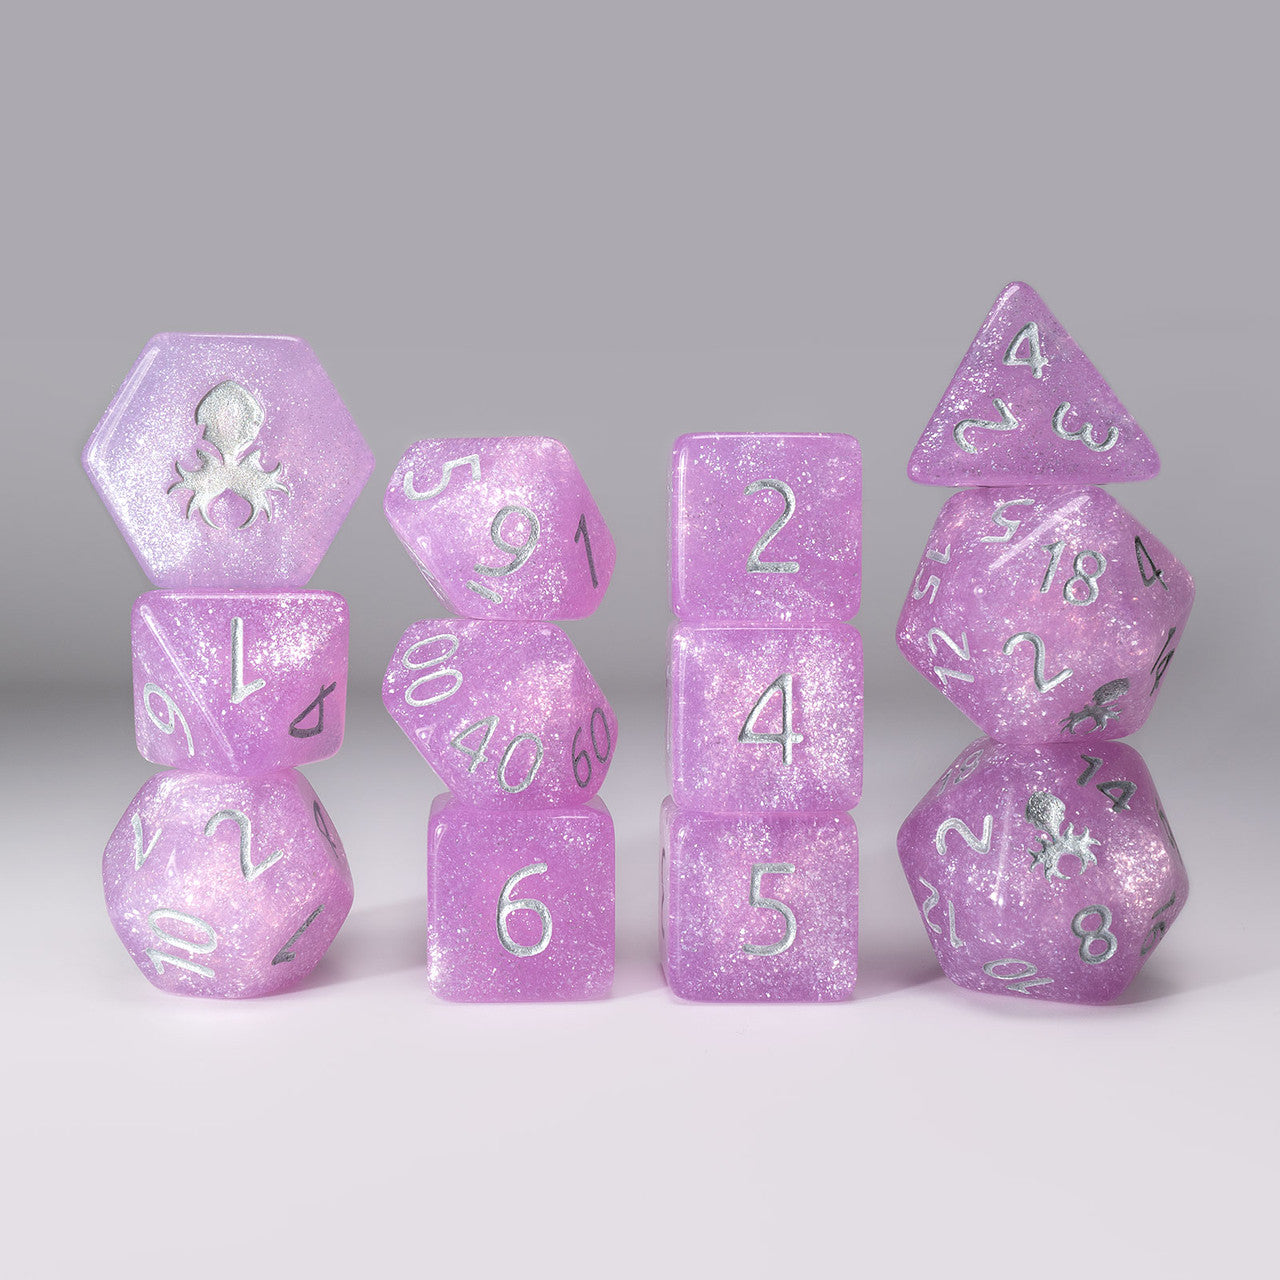 Begonia 12pc Glimmer RPG Dice Set with Silver Ink